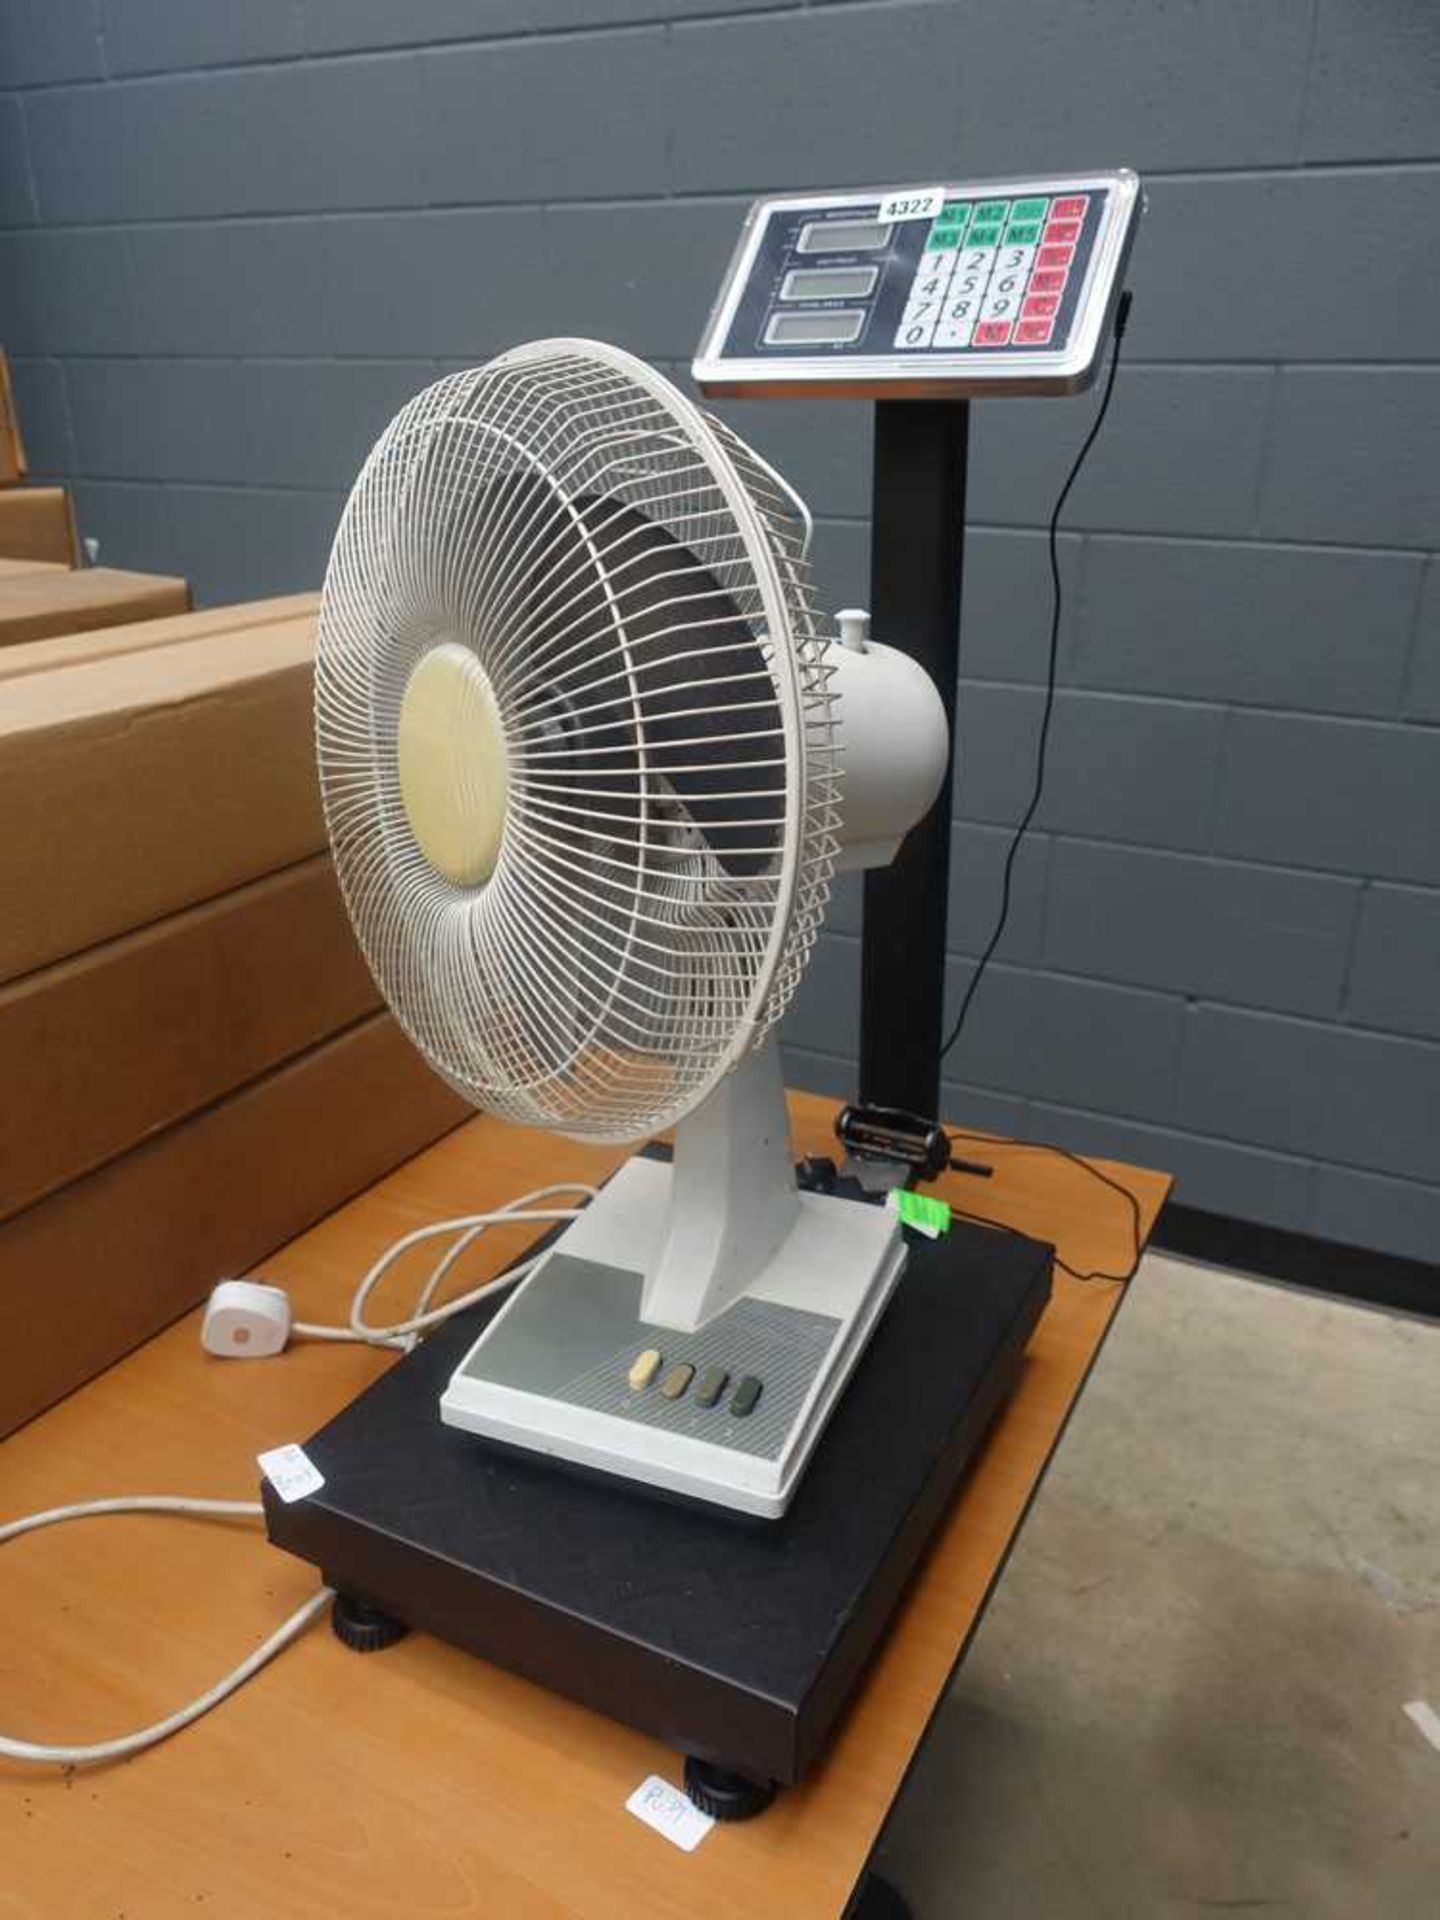 Pair of weighing scales and a desk fan